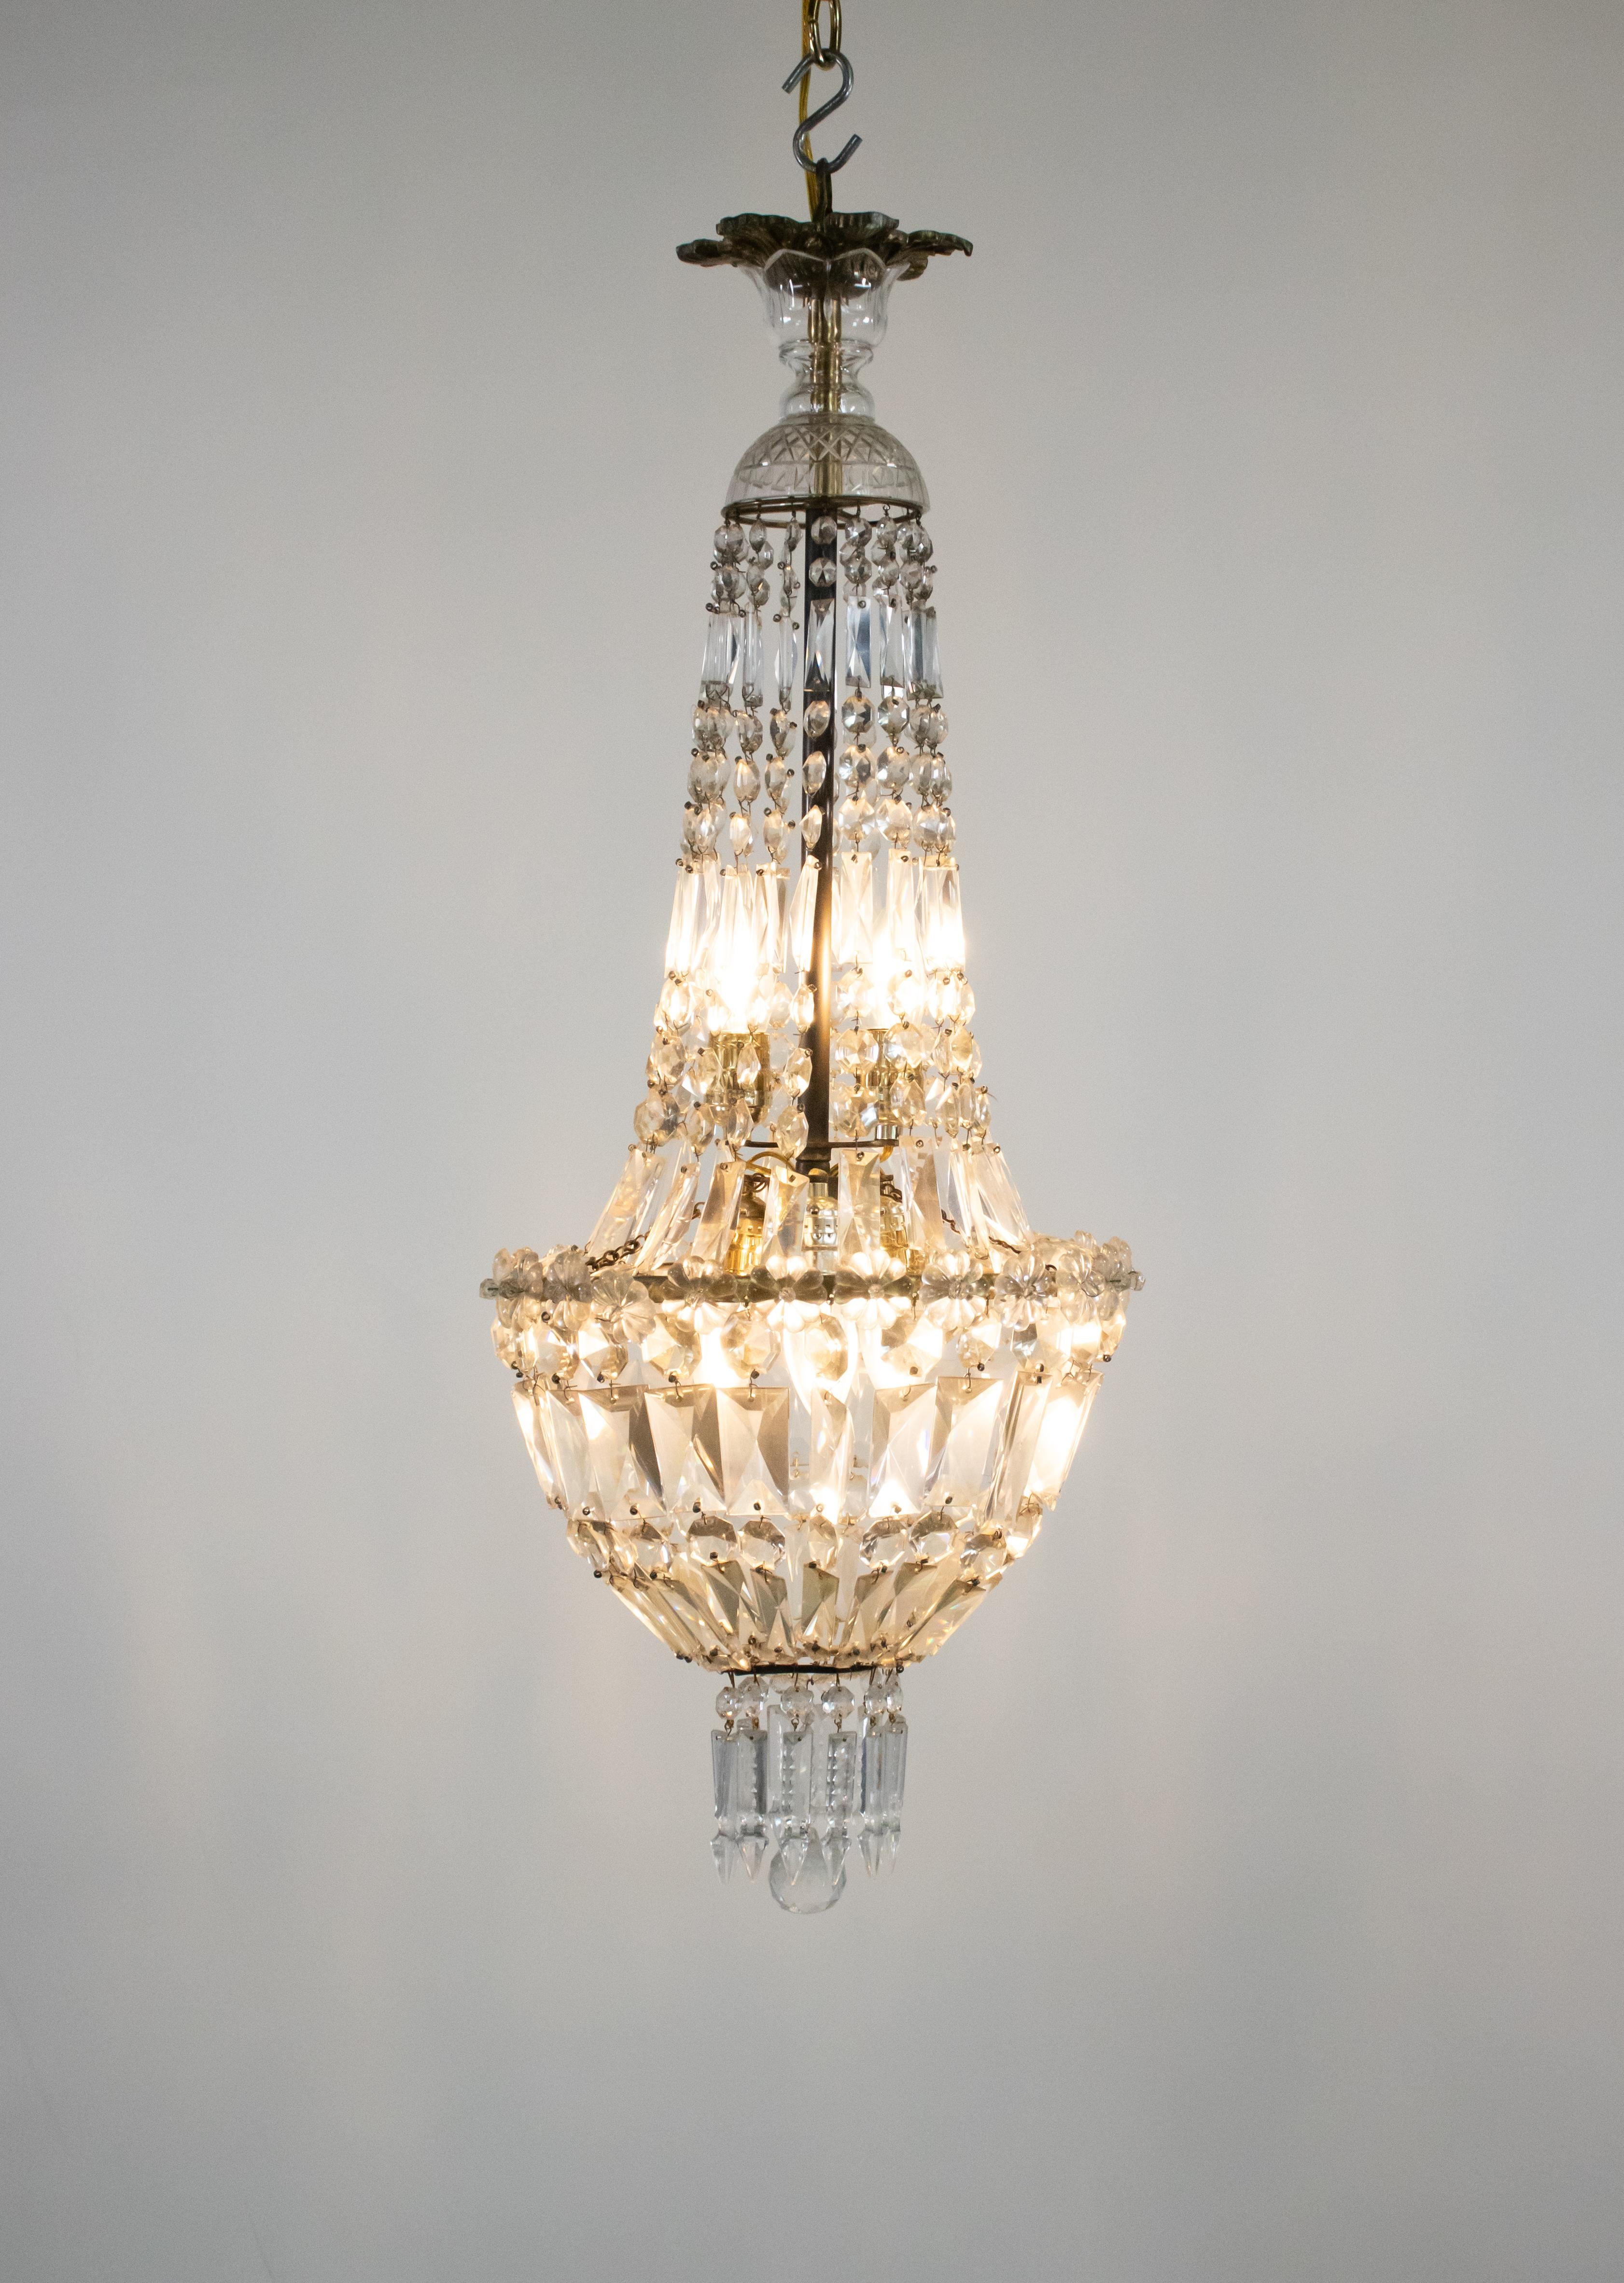 Early 20th Century French Empire Style Crystal Chandelier In Good Condition For Sale In Chicago, IL